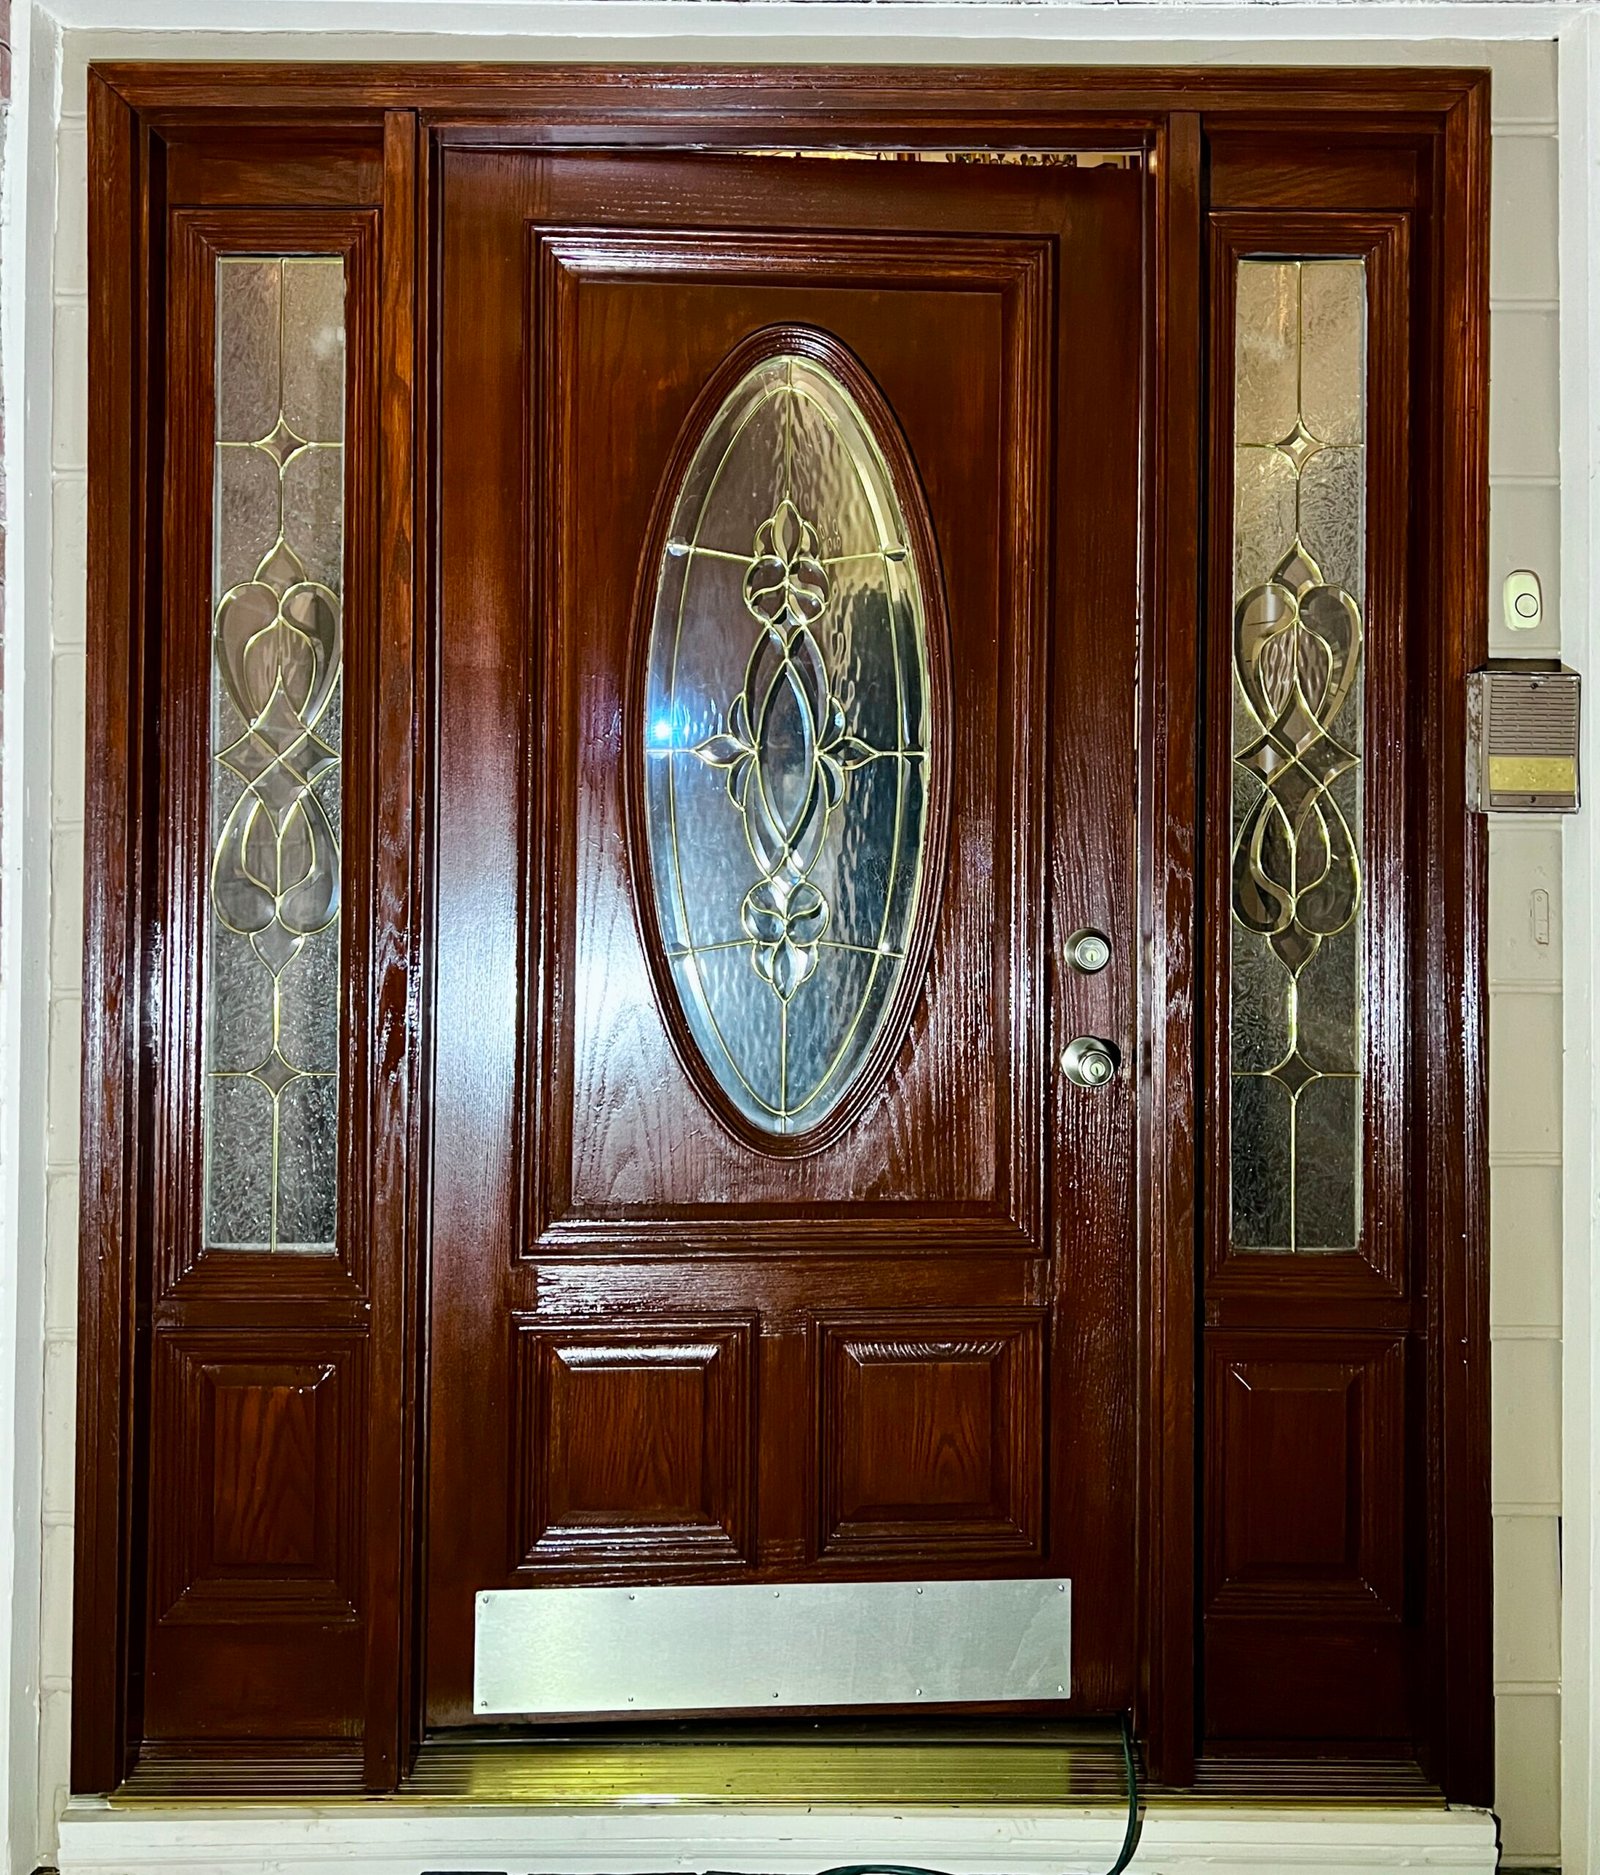 Restored wooden door with a smooth, polished finish